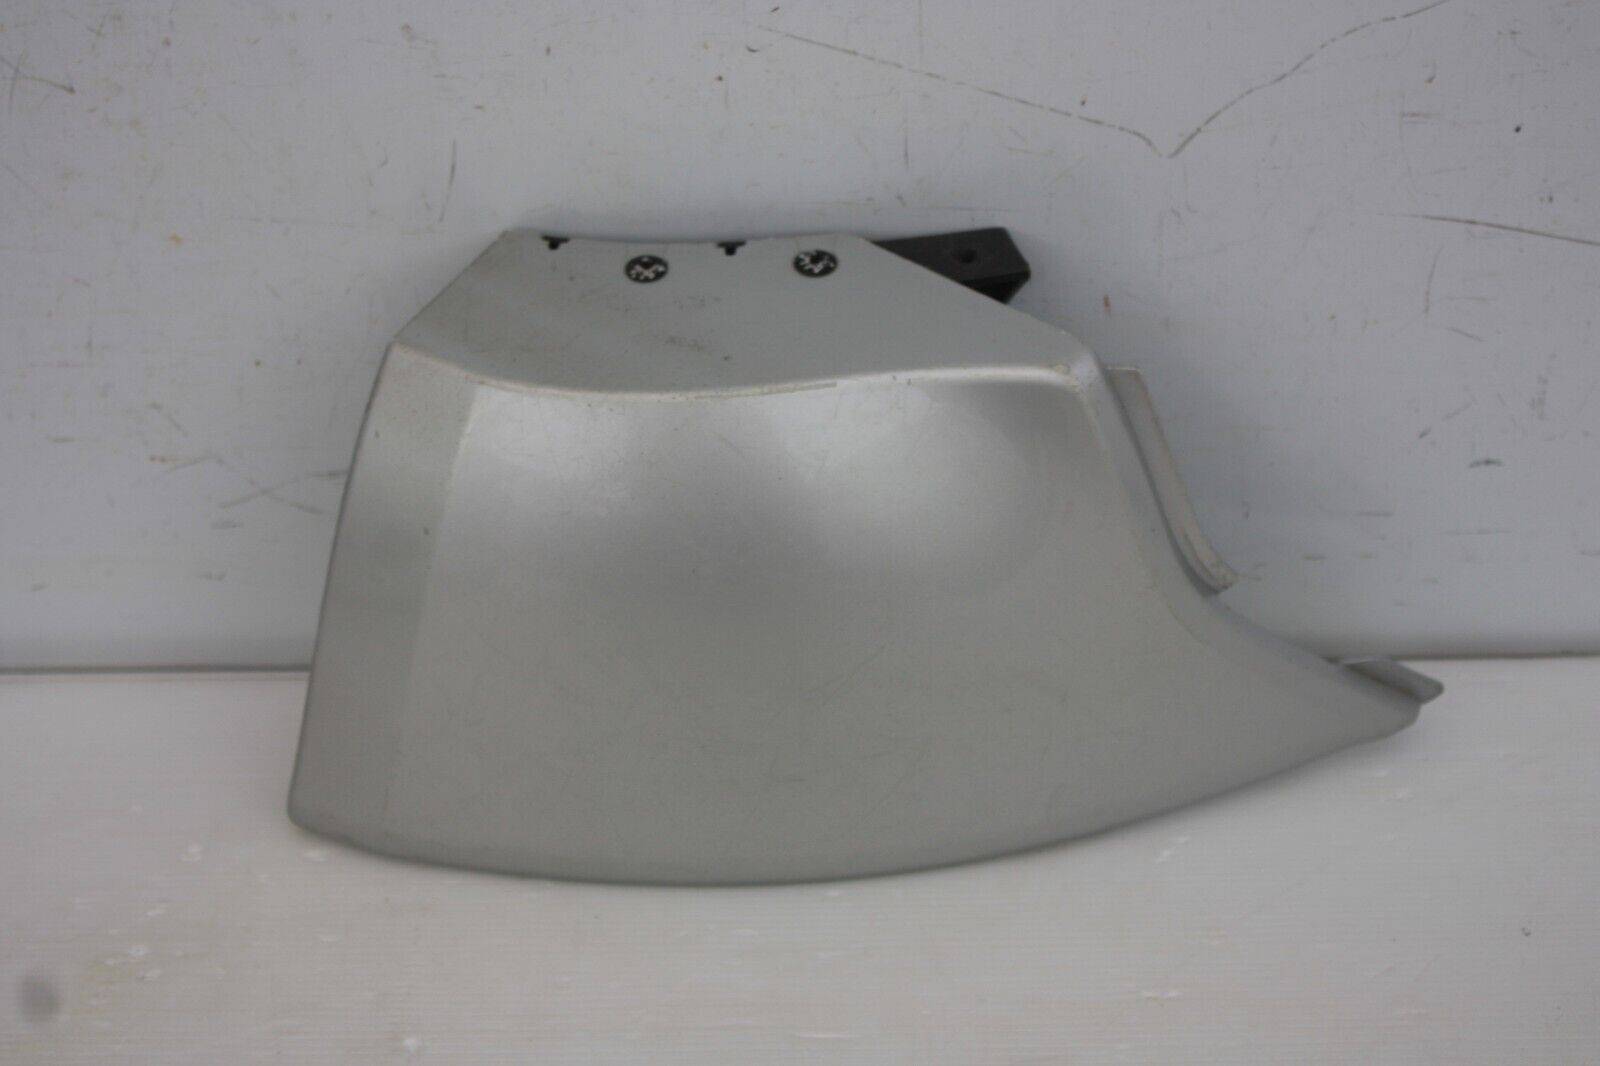 Ford-Fiesta-Rear-Bumper-Right-Side-Trim-Cover-2008-to-2012-8A6J-17B891-AAW-175883634834